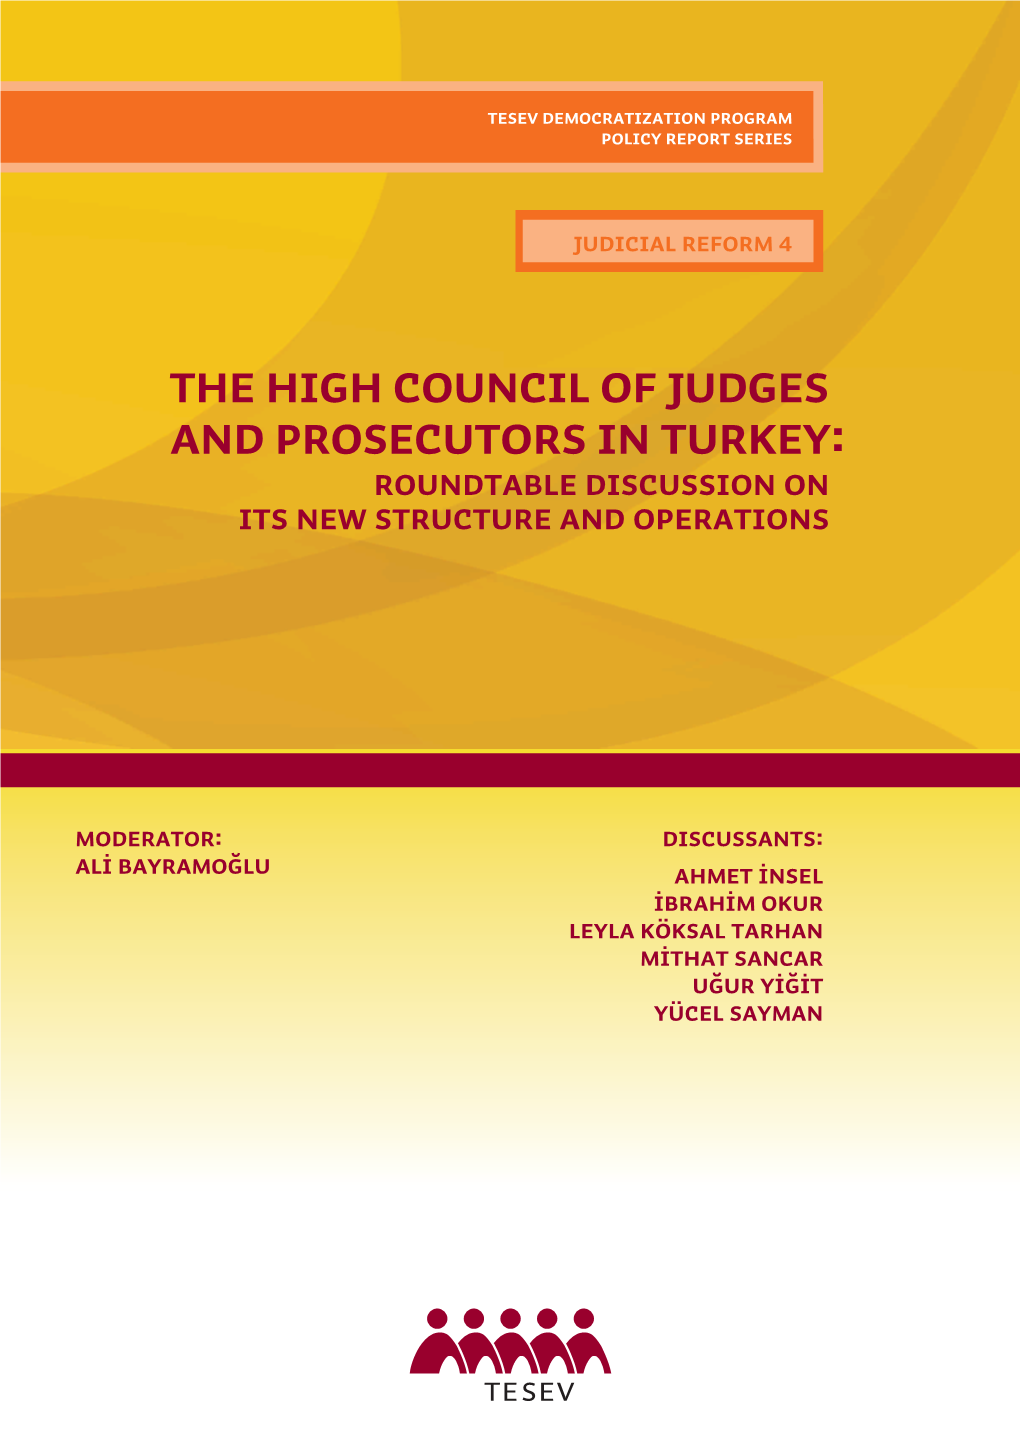 The High Council of Judges and Prosecutors in Turkey: Roundtable Discussion on Its New Structure and Operations